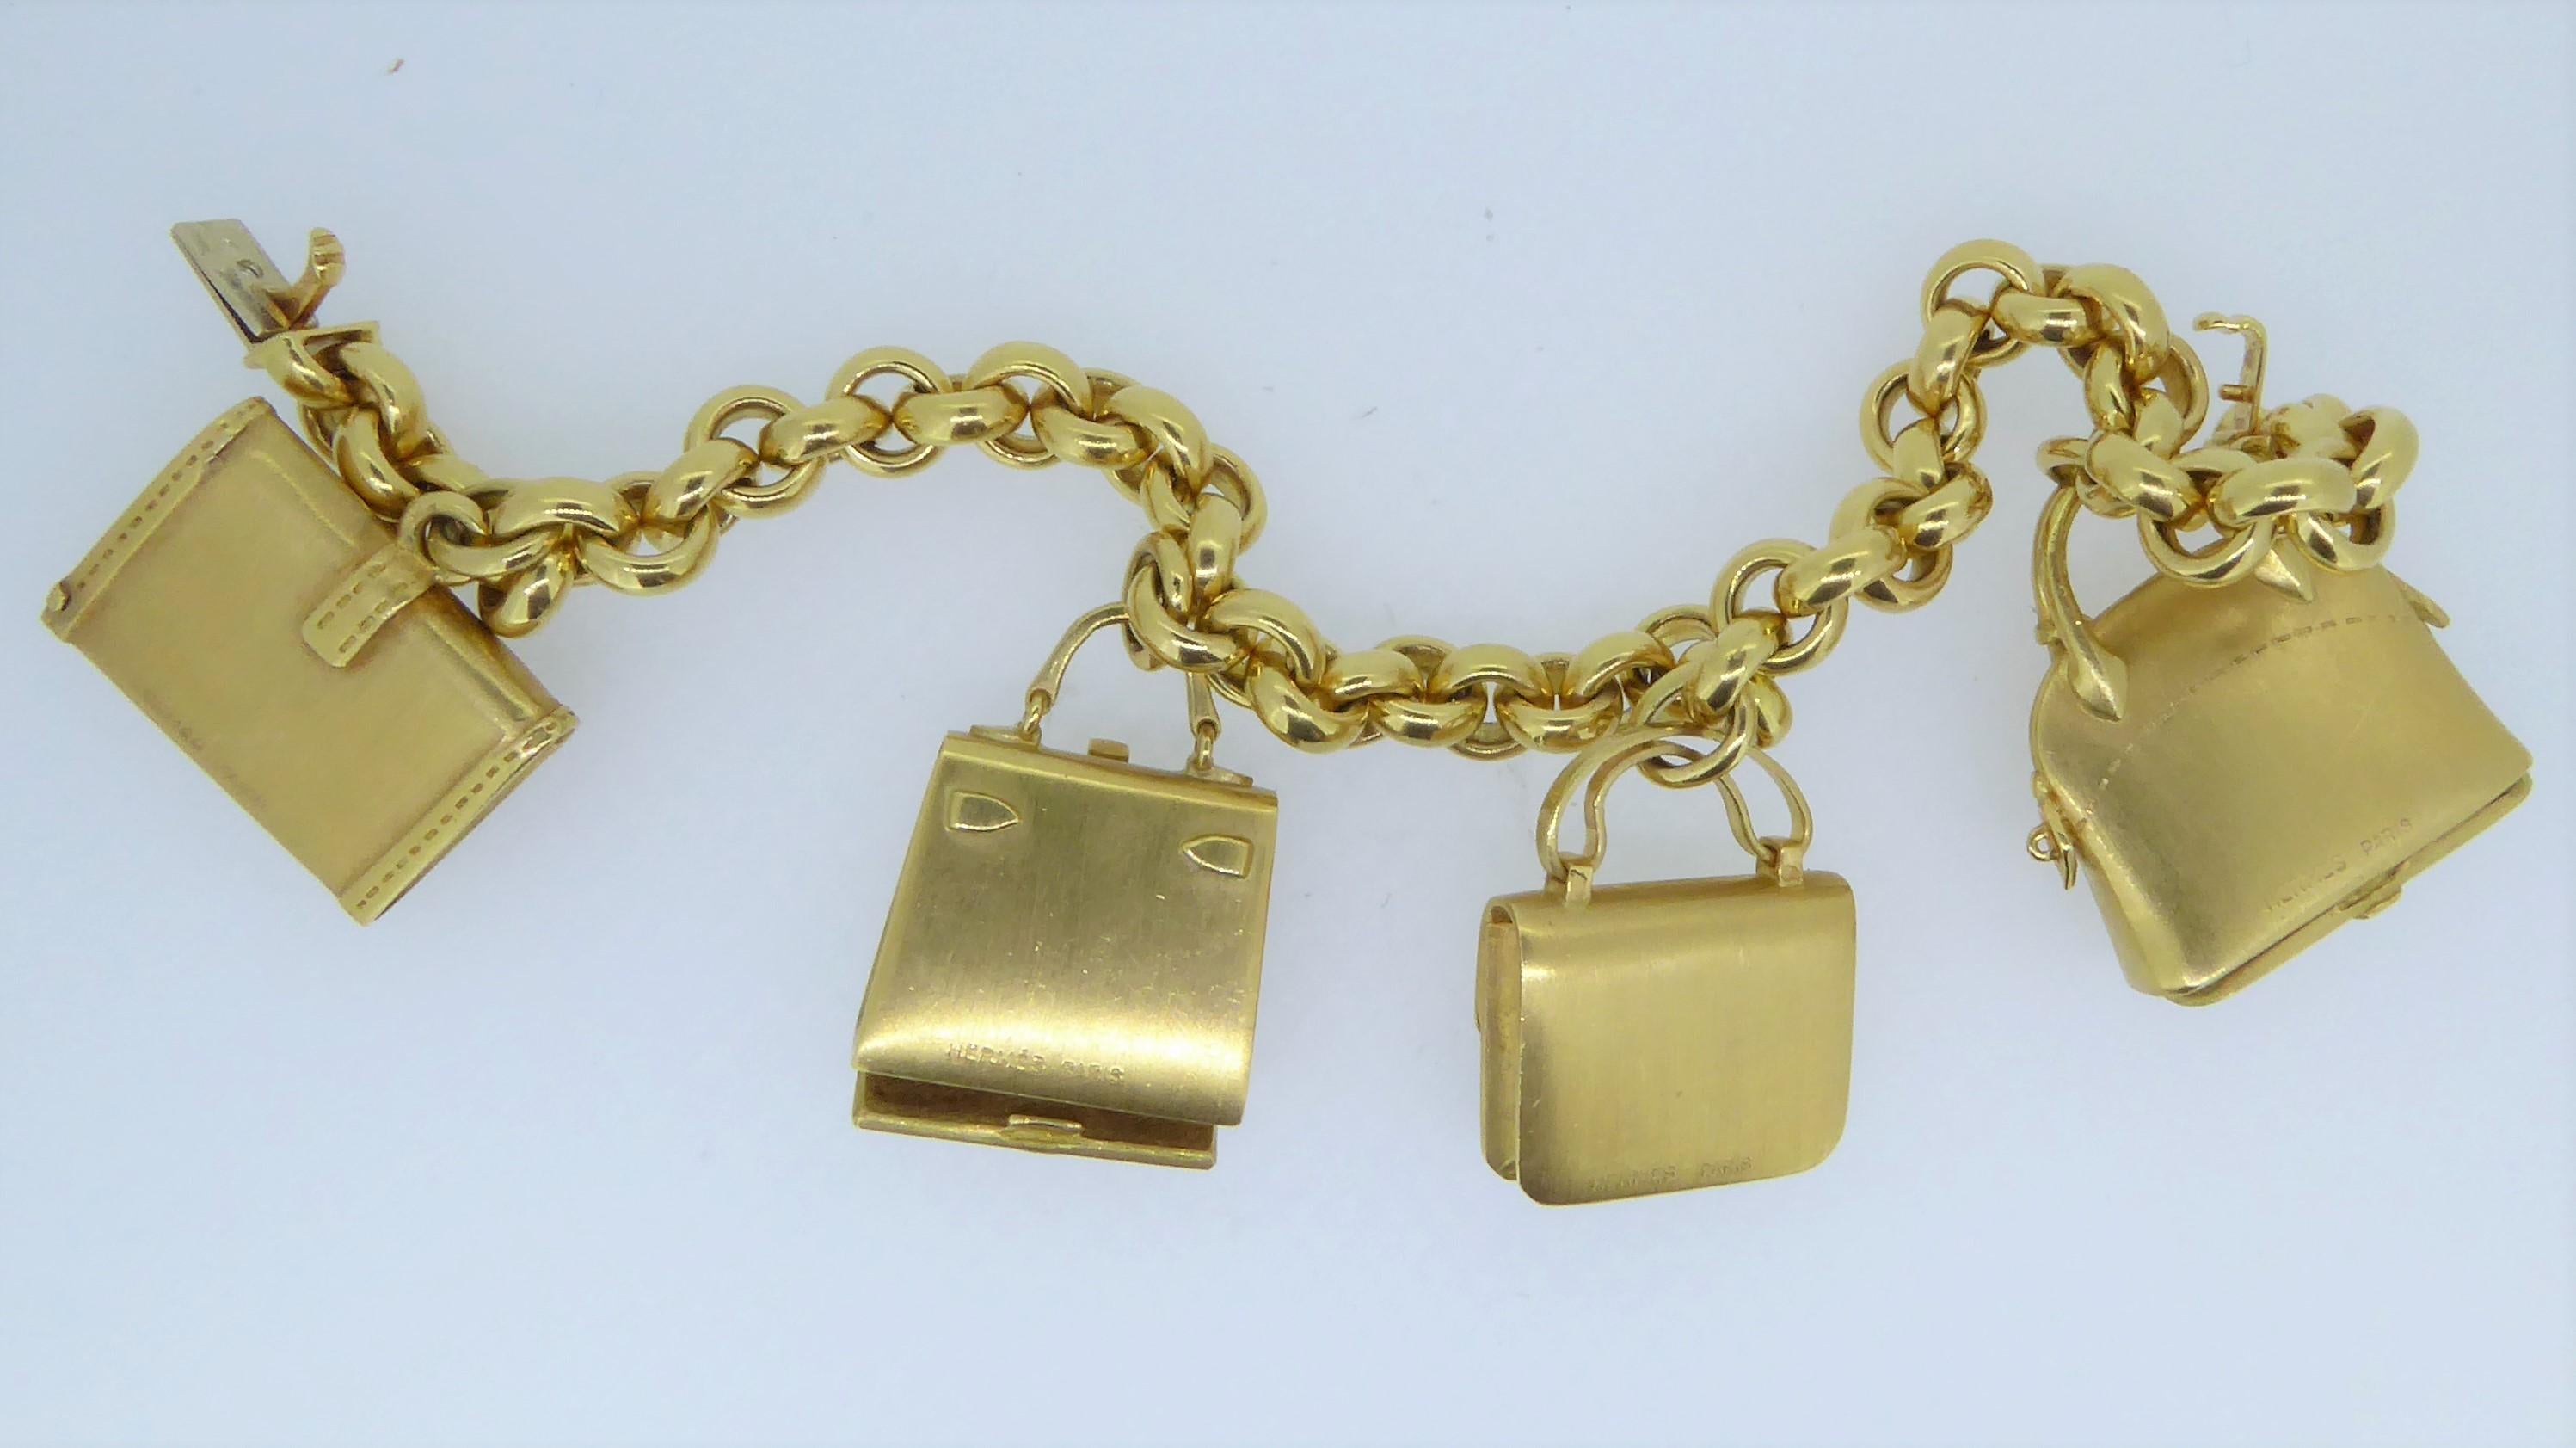 Hermes 18 Carat Yellow Gold Handbag Charm Bracelet. Adorned with 4 different matching Hermes Handbag styles. Two charms which open at the base. Weighs approx 91.3 grams. All bags signed 